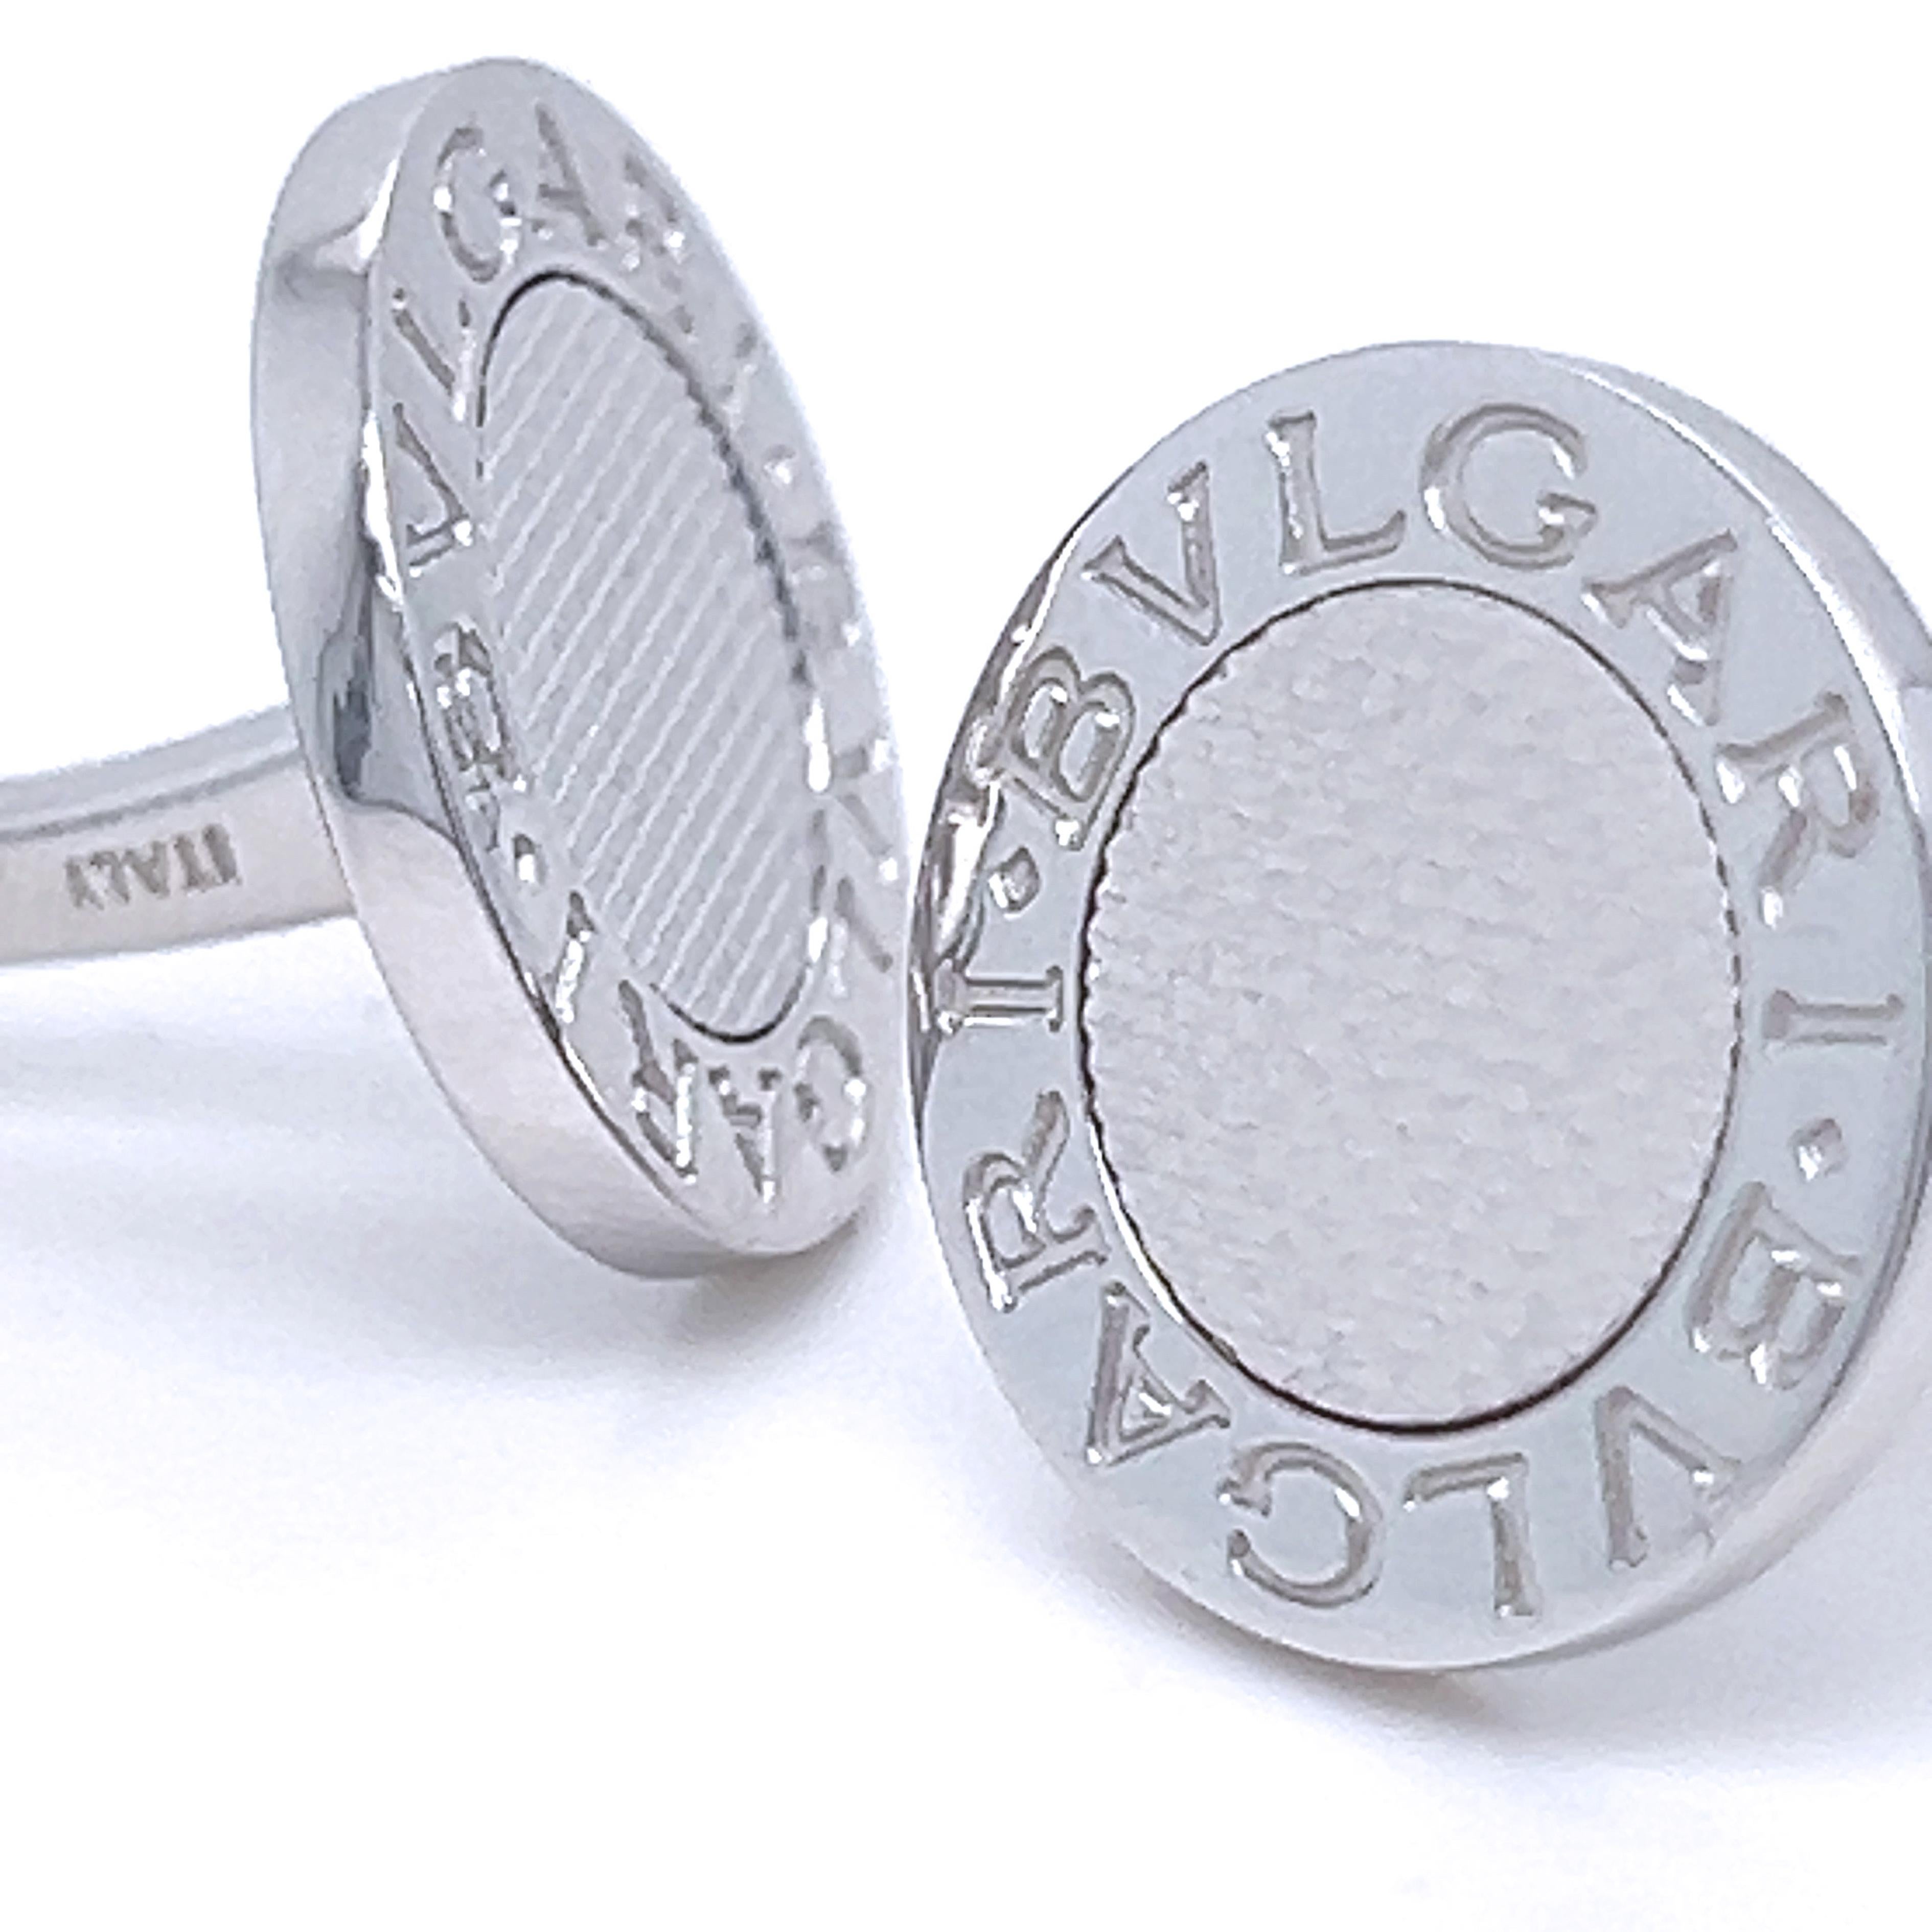 Original 2010, iconic, absolutely chic Bvlgari Bvlgari Cufflinks.
The Bvlgari Bvlgari motif becomes from the beginning a new timeless classic of this outstanding brand, here declined in the solid 18KT white gold, matelassé version.
A little